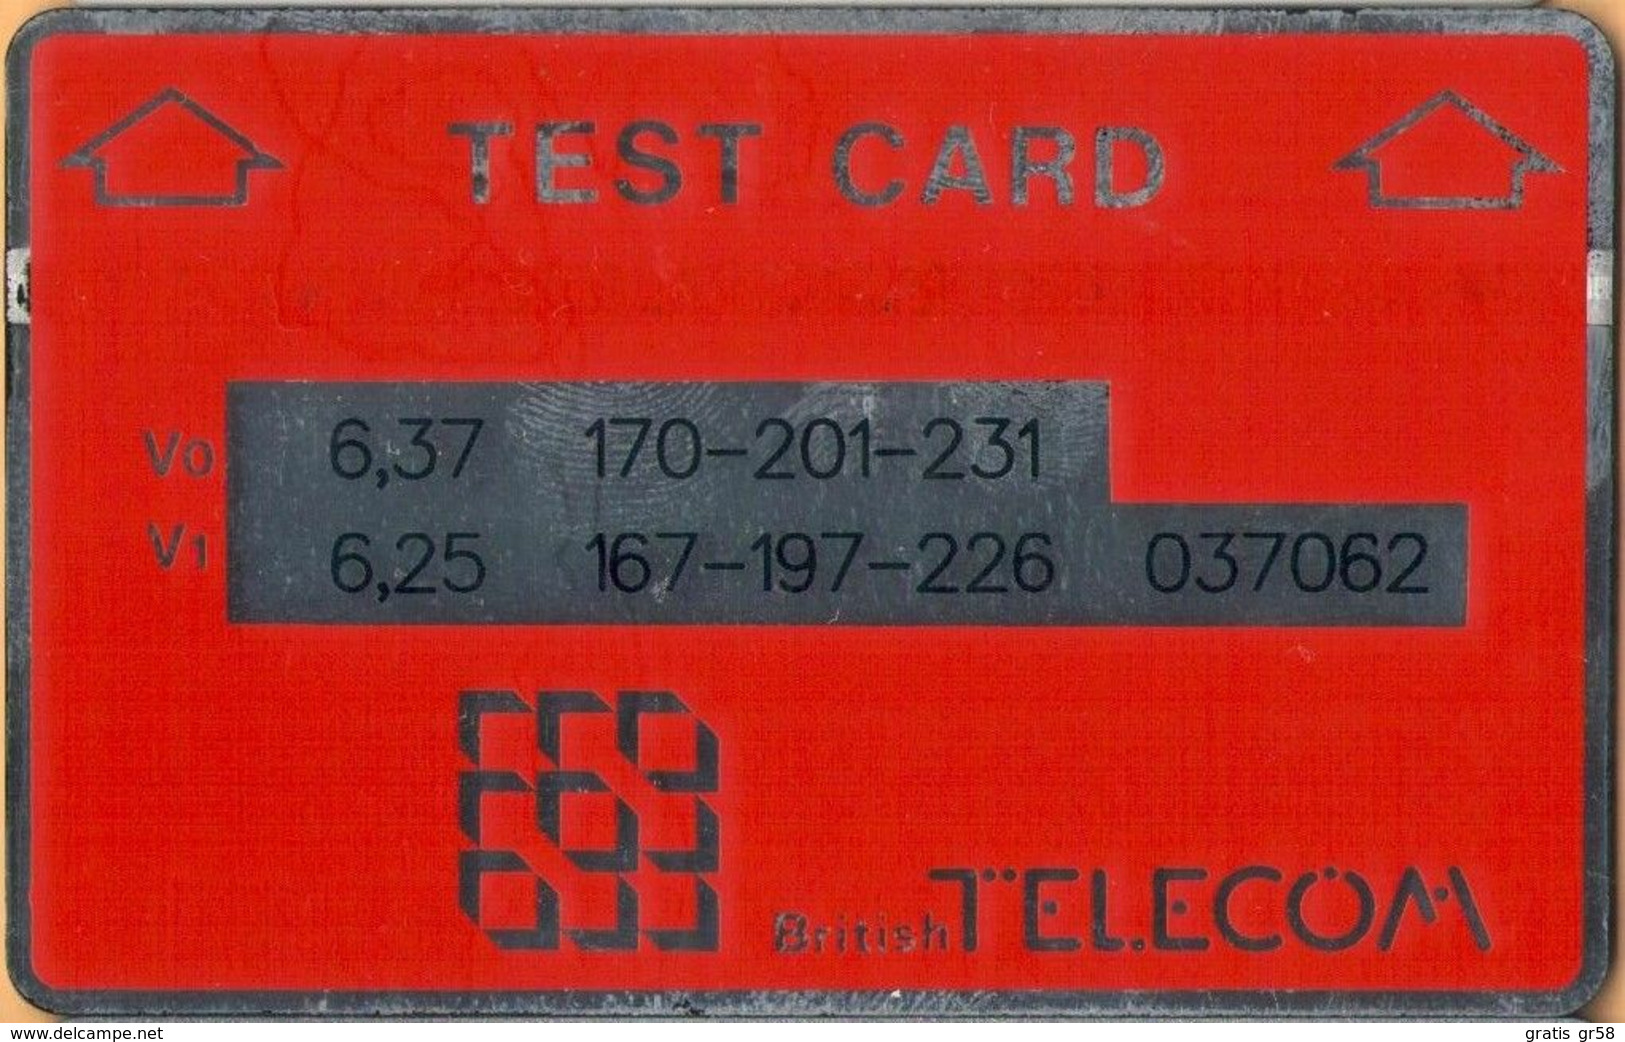 United Kingdom - BTT006 Test Card, L&G, Red / Polished Silver, Marks On Surface, As Scan - BT Engineer BSK Service Test Issues